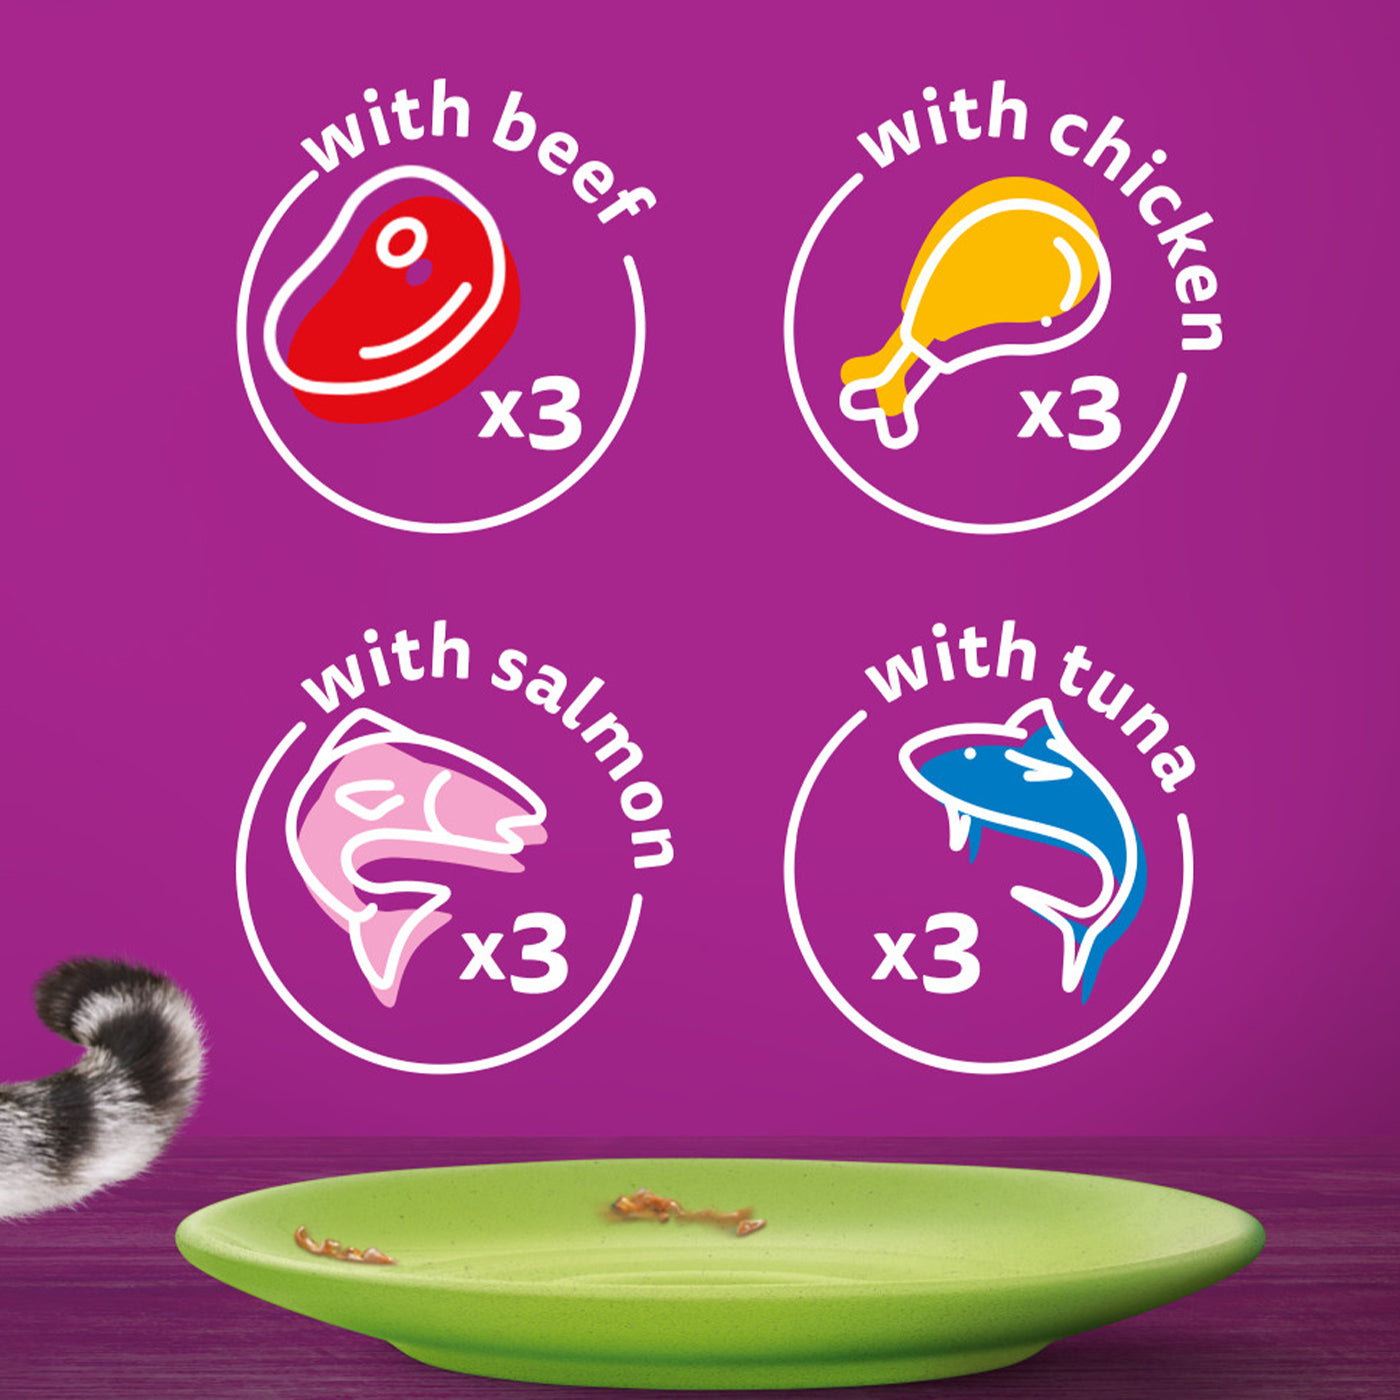 Whiskas 1+ Cat Mixed Menu in Jelly (12x85g)